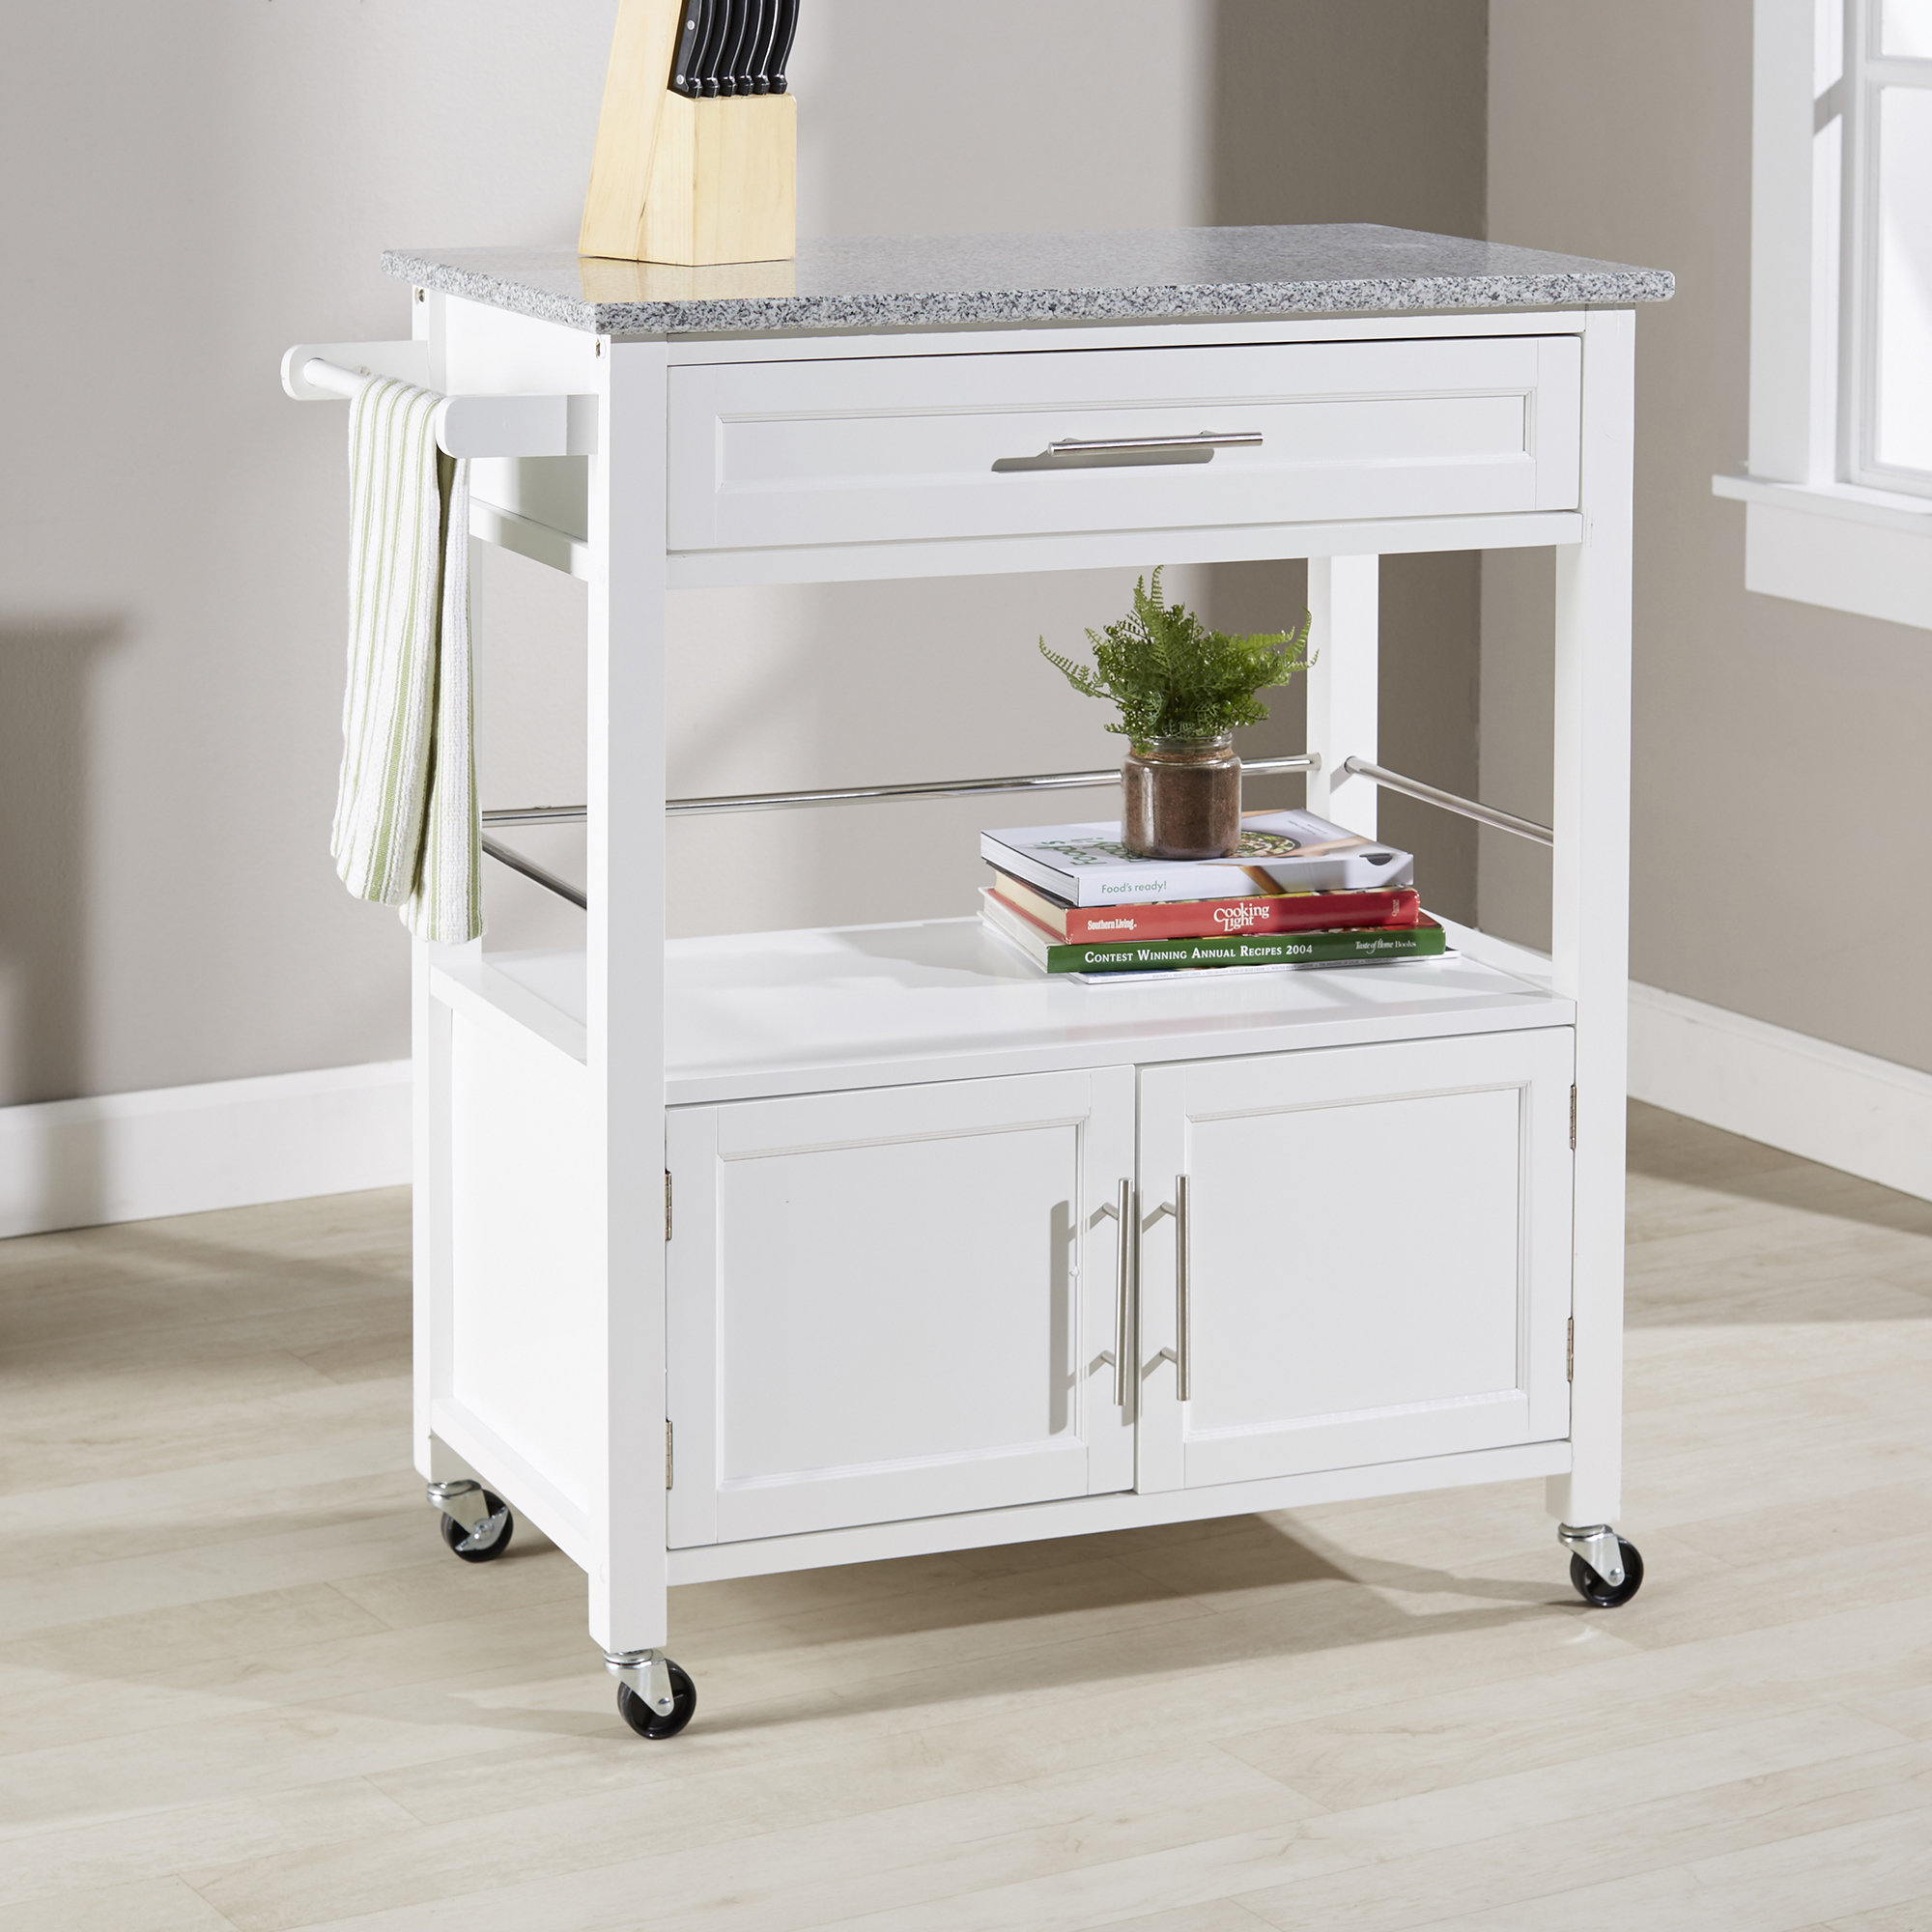 Andover Mills Palouse Kitchen Island With Granite Top Reviews Wayfair,Office Space Interior Design Ideas